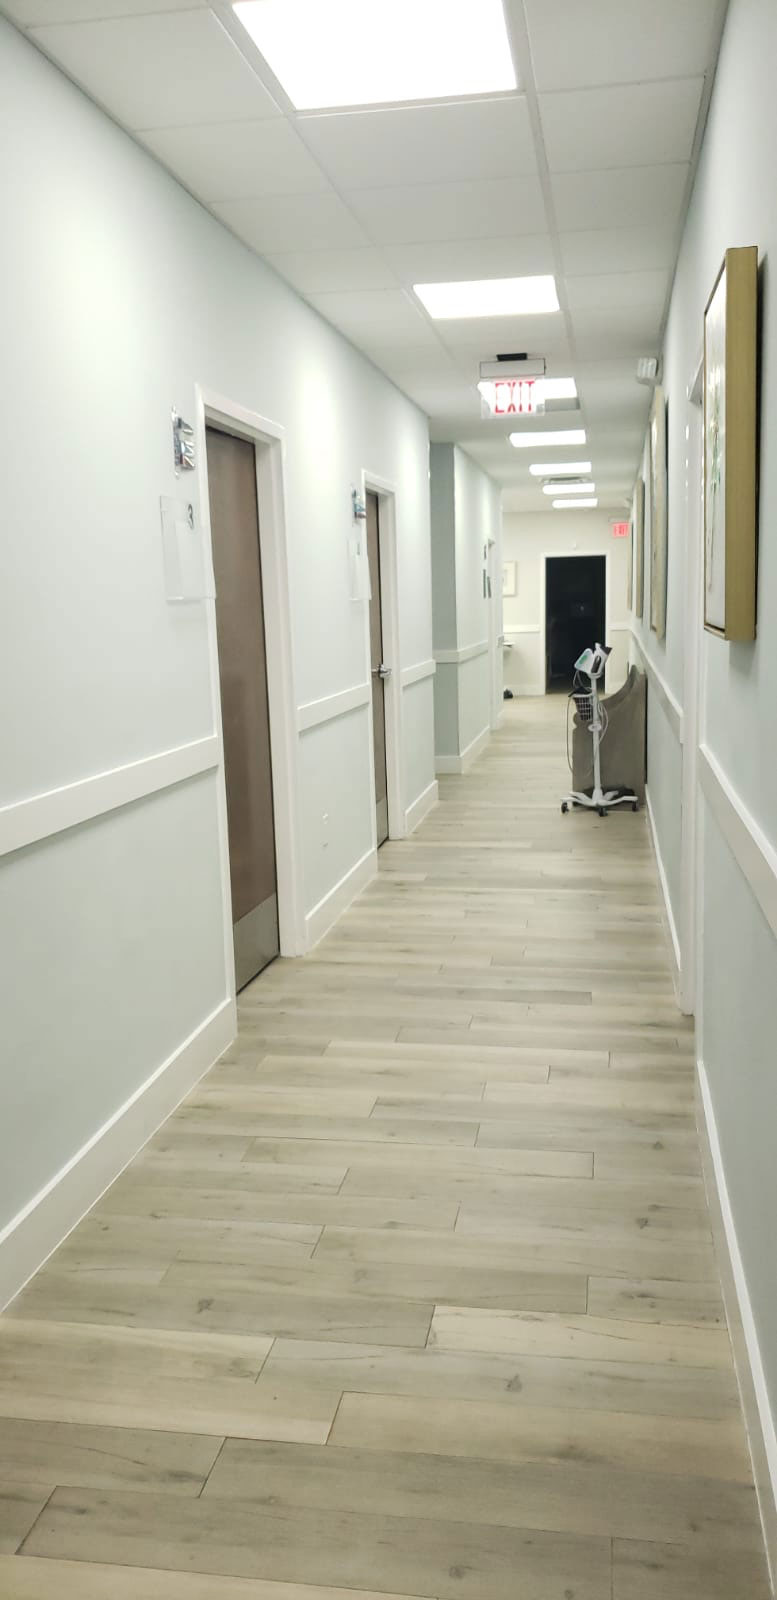 Research Facility Hallway